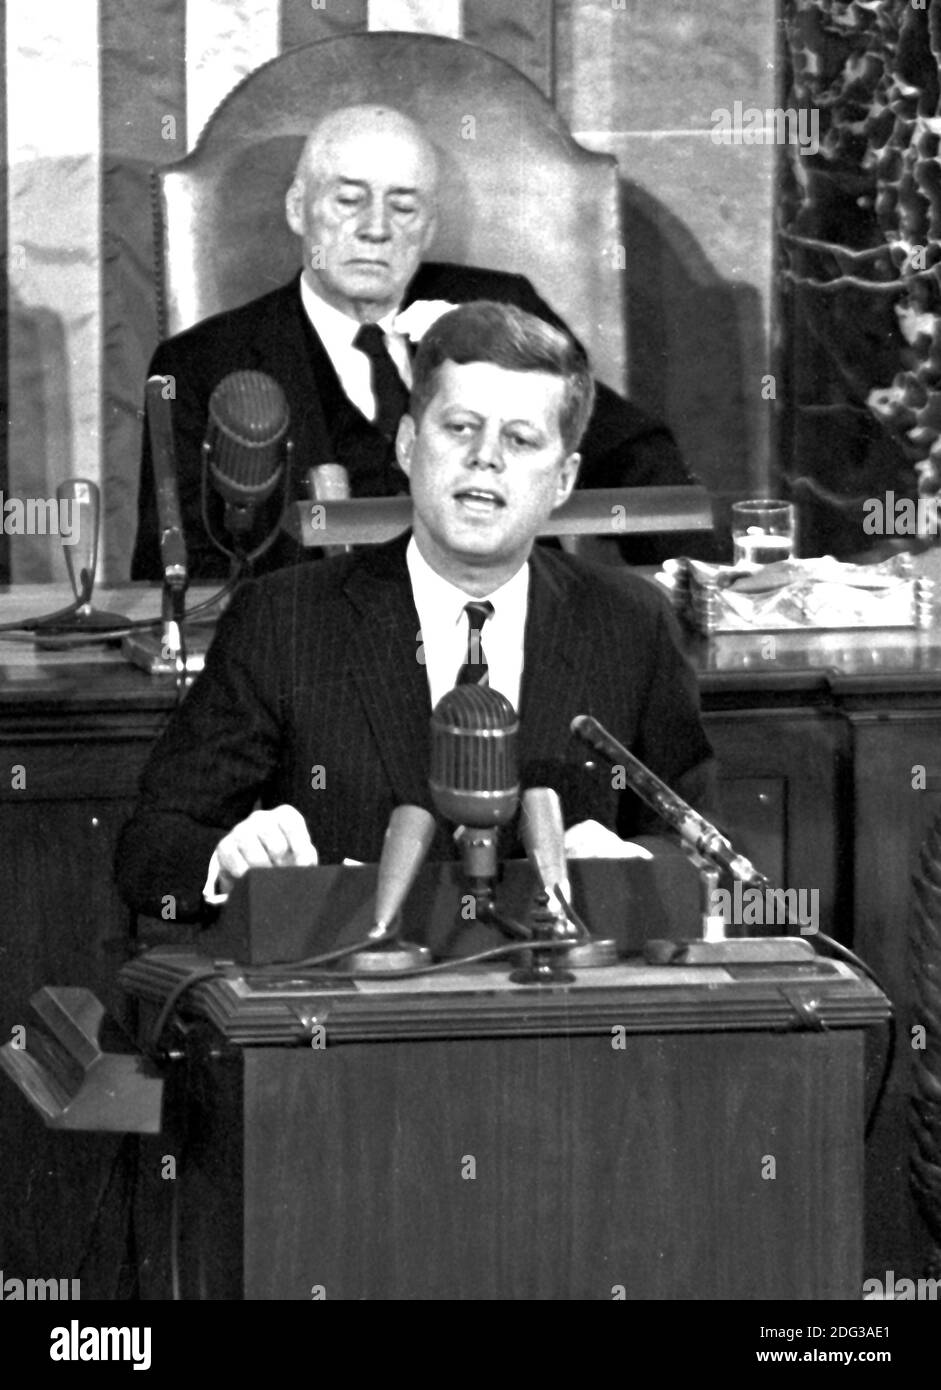 United States President John F. Kennedy outlined his vision for manned exploration of space to a Joint Session of the United States Congress, in Washington, DC, USA, on May 25, 1961 when he declared, '...I believe this nation should commit itself to achieving the goal, before this decade is out, of landing a man on the Moon and returning him safely to the Earth.' This goal was achieved when astronaut Neil A. Armstrong became the first human to set foot upon the Moon at 10:56 p.m. EDT, July 20, 1969. Shown in the background is Speaker of the House Sam T. Rayburn (Democrat of Texas). Photo by Ar Stock Photo